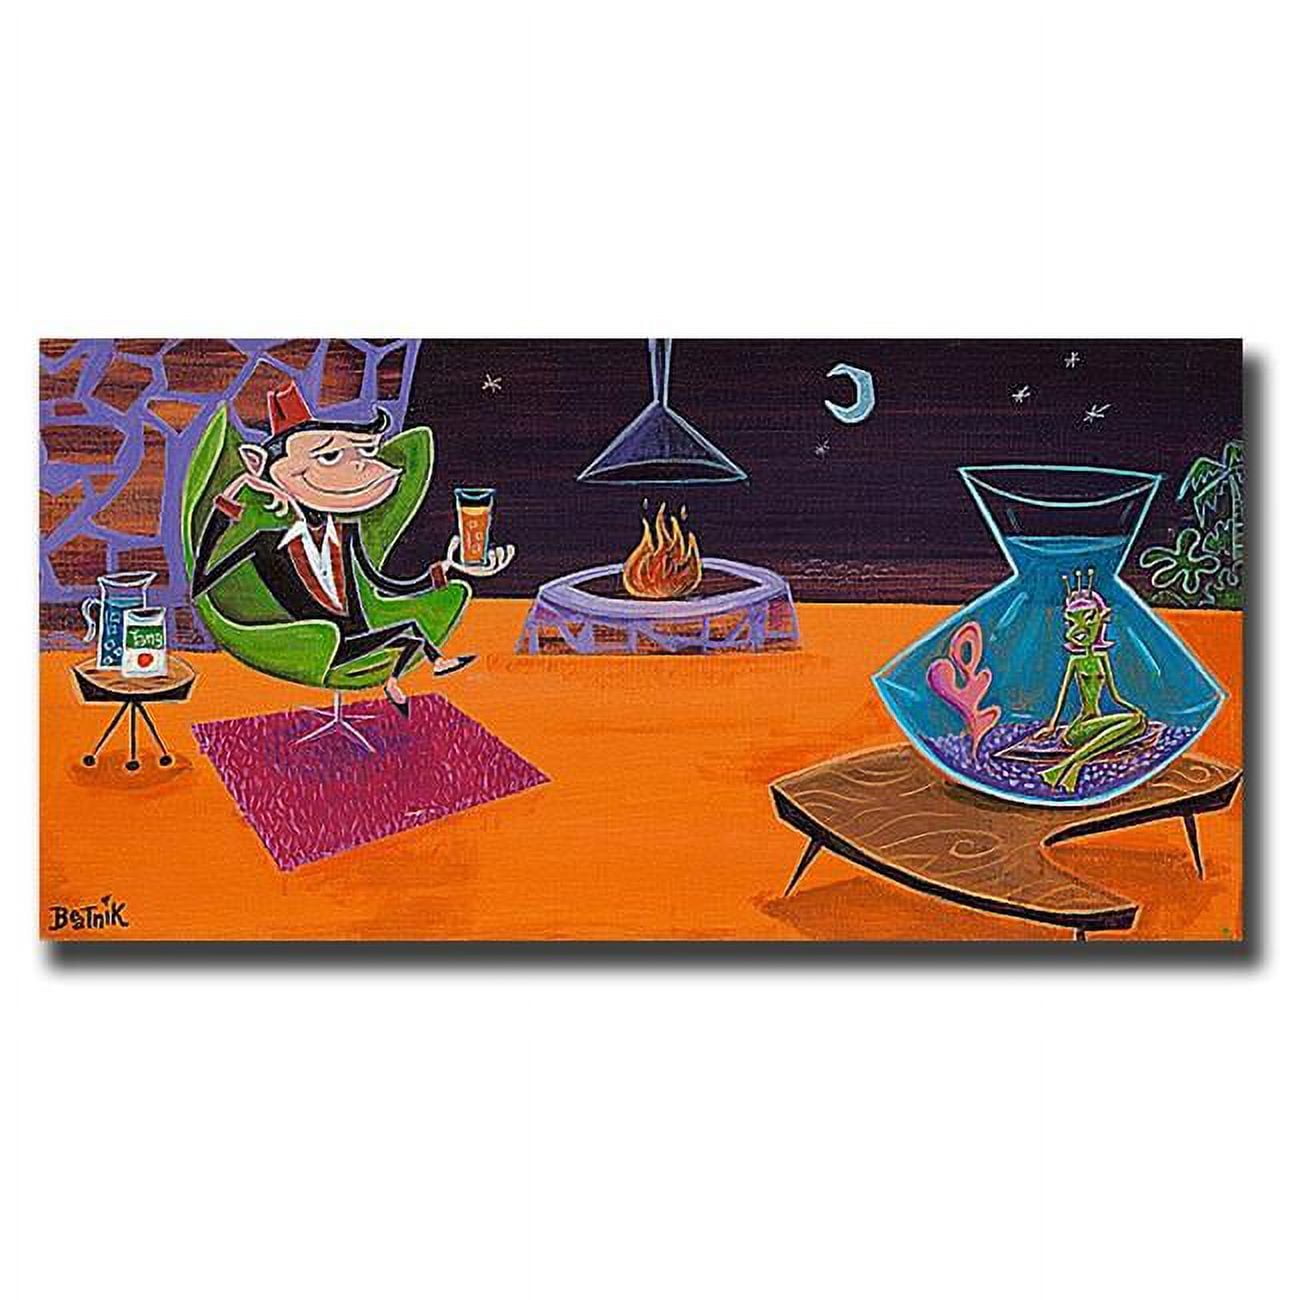 1224f374ig Sea Monkey By Beatnik Premium Gallery-wrapped Canvas Giclee Art - Ready-to-hang, 12 X 24 X 1.5 In.